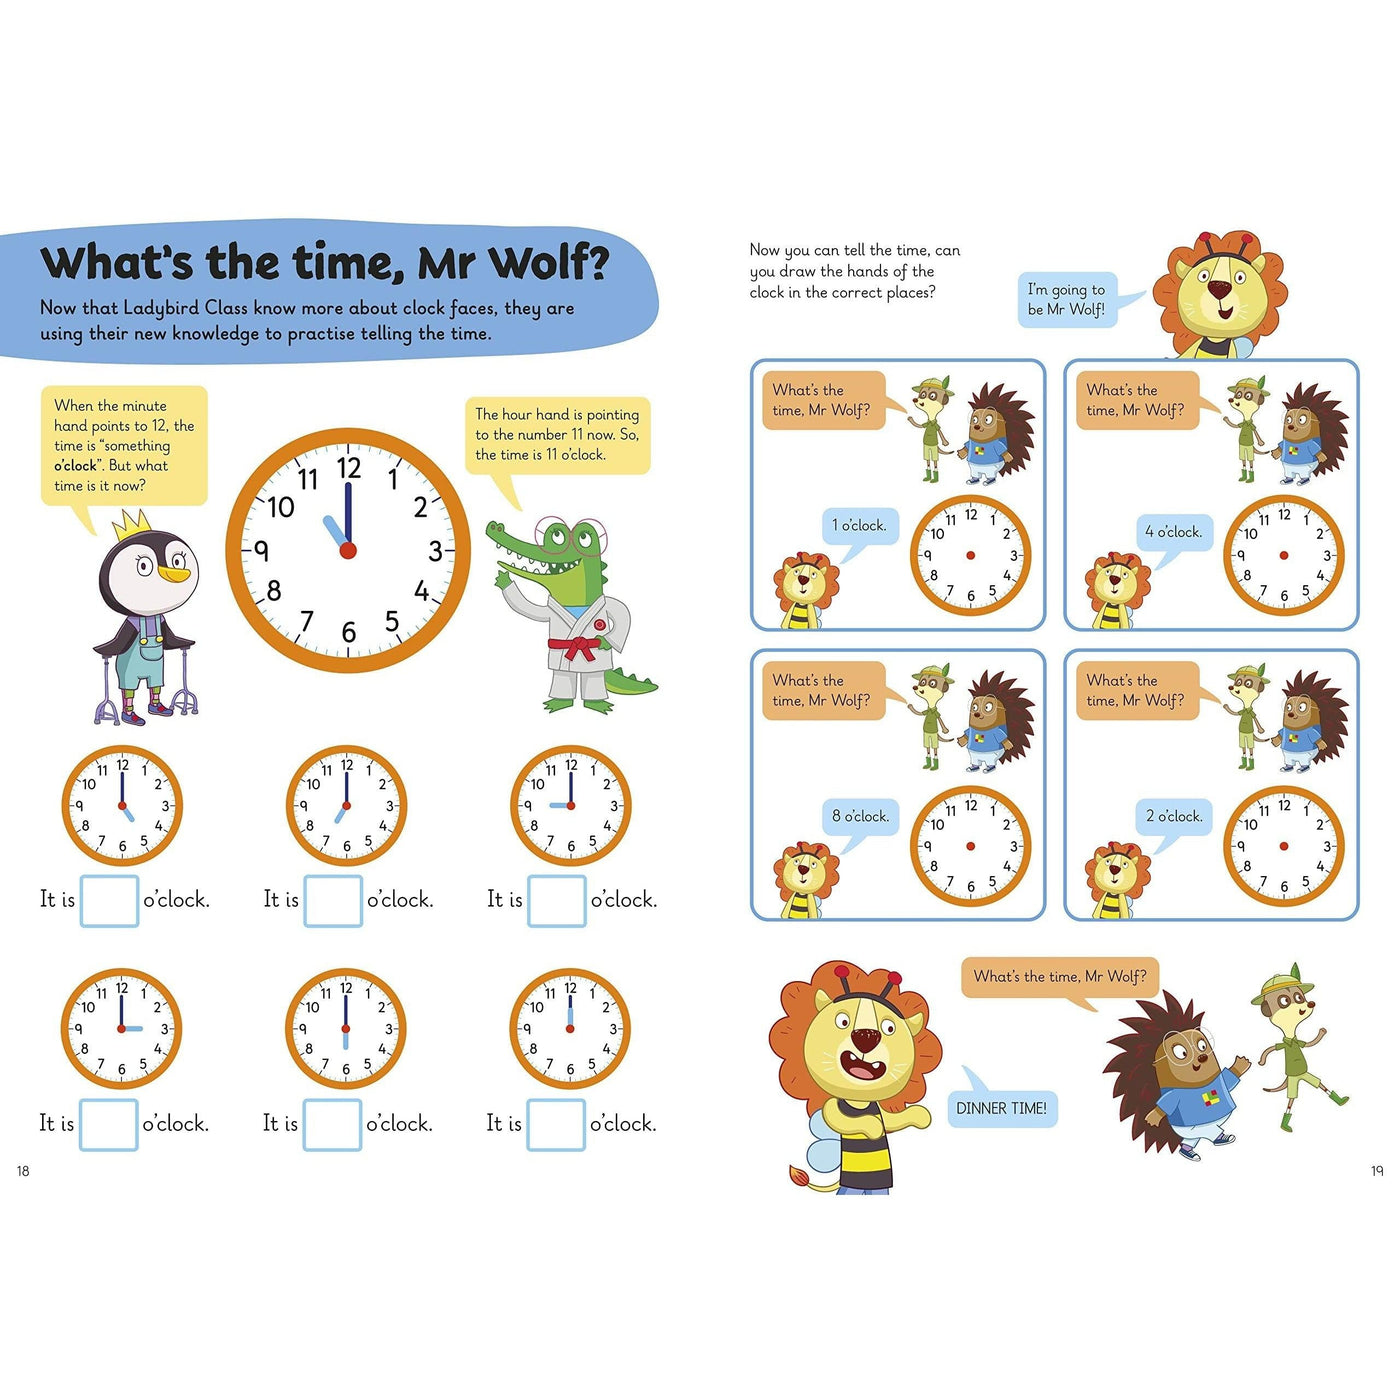 Tell the Time: A Learn with Ladybird Activity Book 5-7 years: Ideal for home learning (KS1)